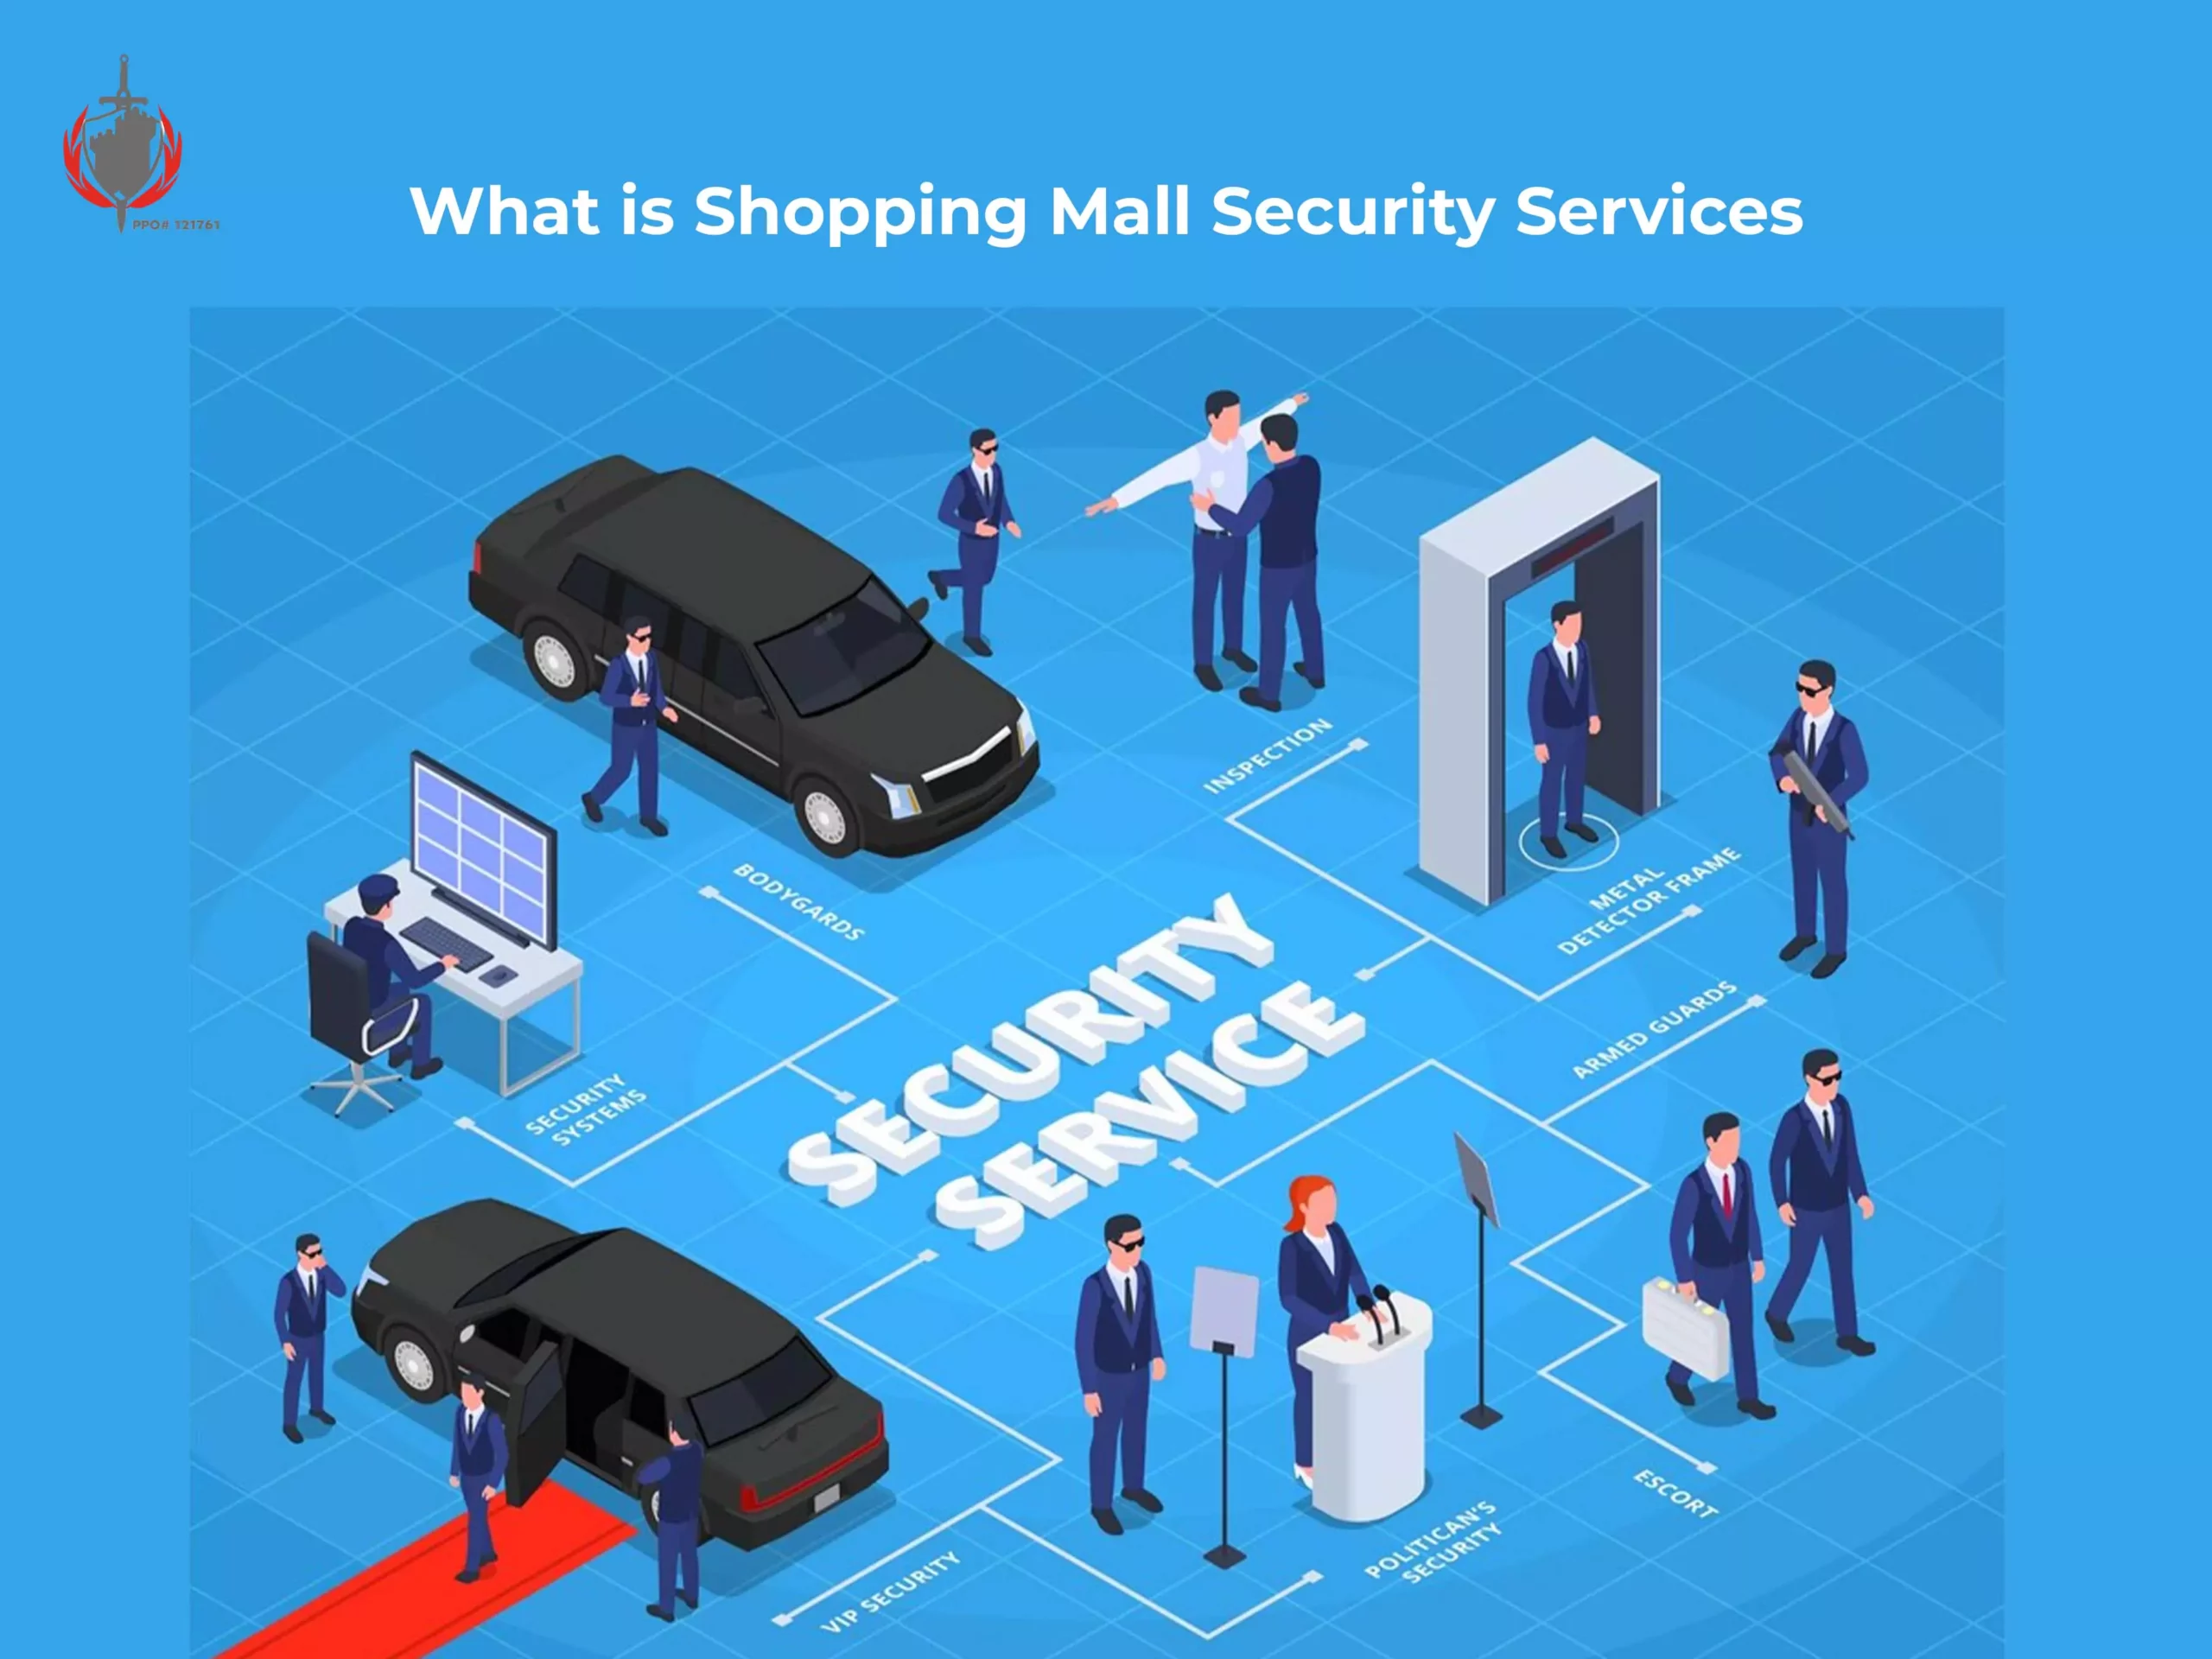 What is Shopping Mall Security Services